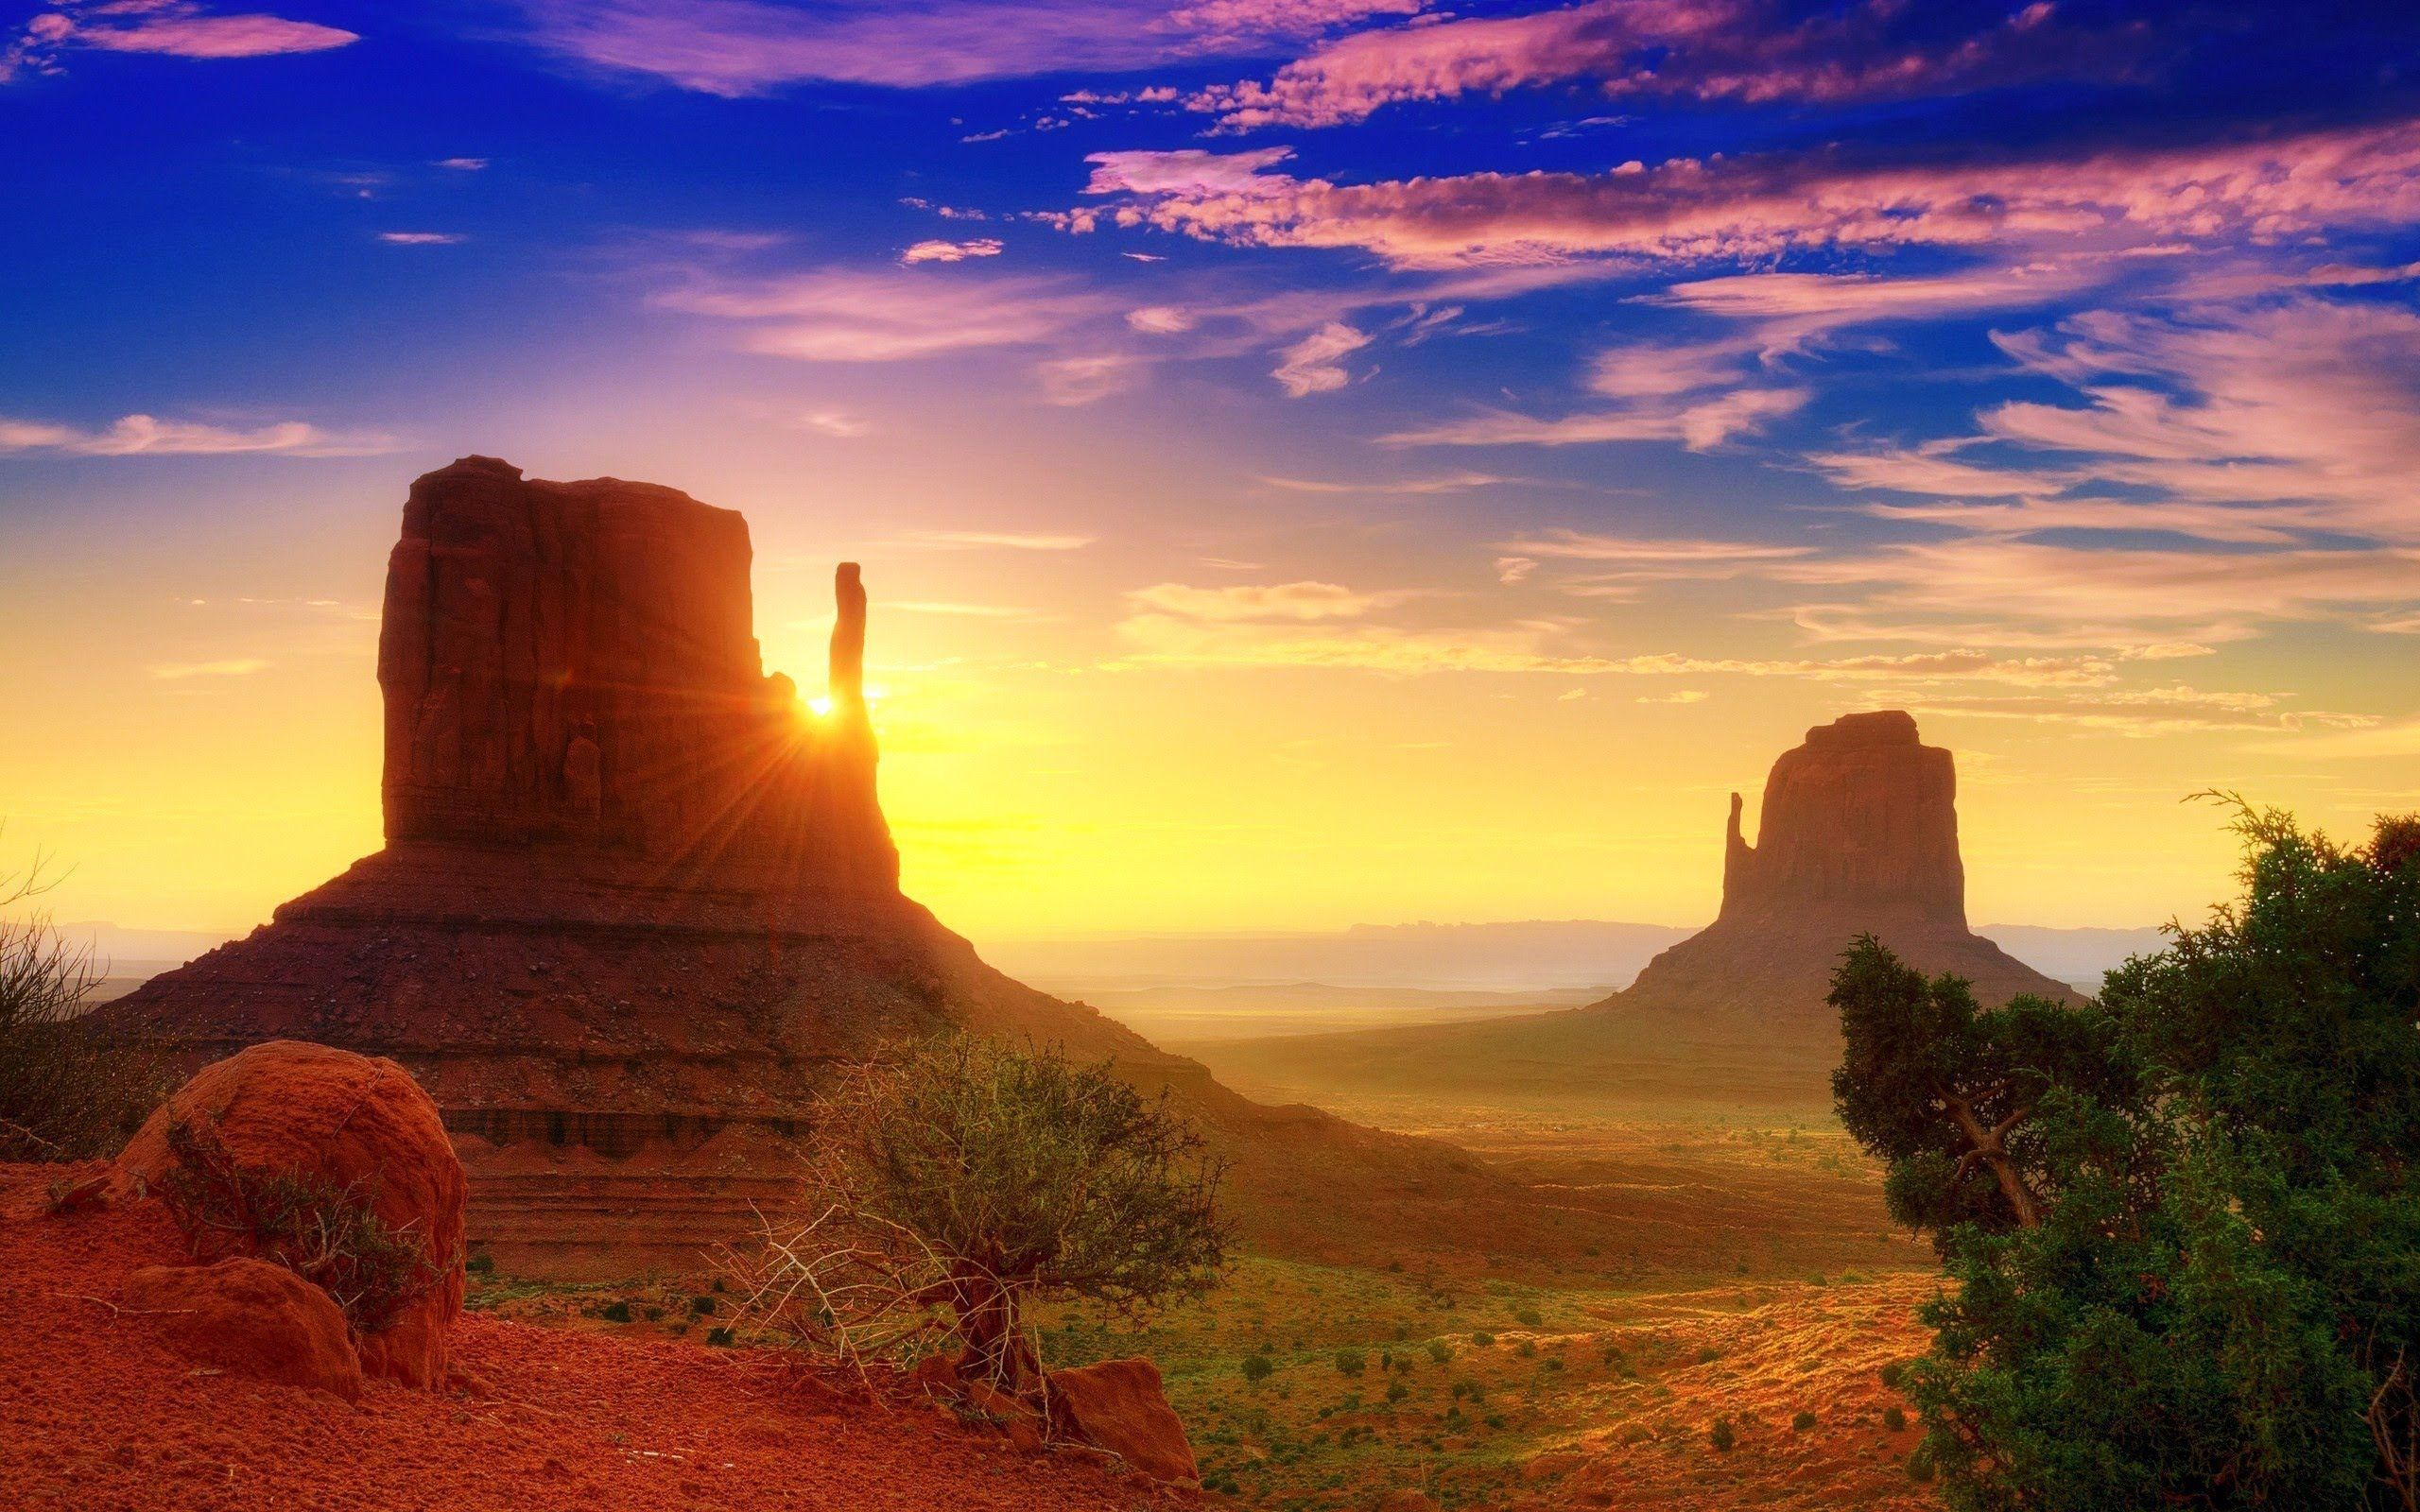 landscapes.. ! Between Canyons, Over Cliffs and Amazing Landscapes. Grand canyon sunrise, Monument valley, Grand canyon wallpaper